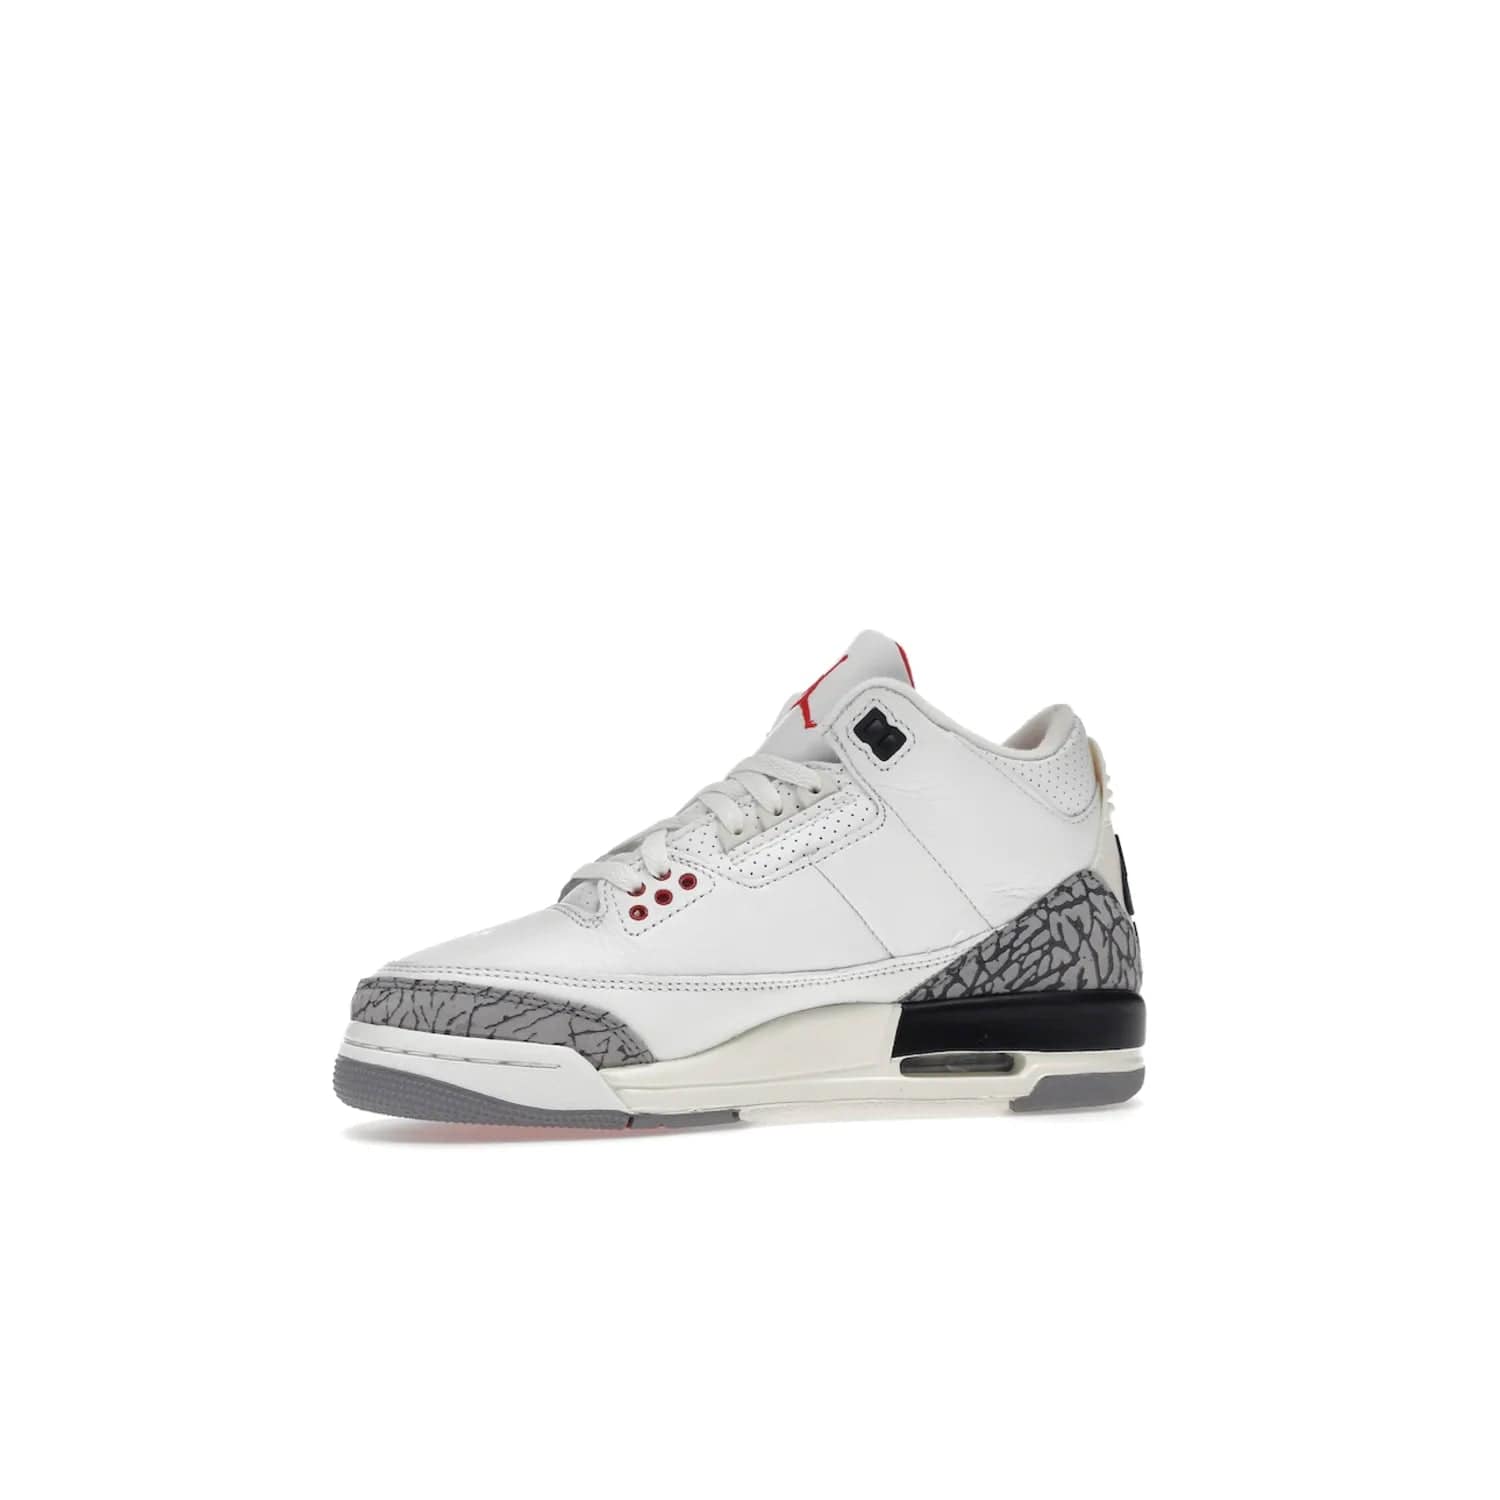 Jordan 3 Retro White Cement Reimagined (GS) - Image 17 - Only at www.BallersClubKickz.com - Grab the perfect blend of modern design and classic style with the Jordan 3 Retro White Cement Reimagined (GS). Features Summit White, Fire Red, Black, and Cement Grey colorway, iconic Jordan logo embroidered on the tongue, and “Nike Air” branding. Limited availability, get your pair before March 11th 2023.